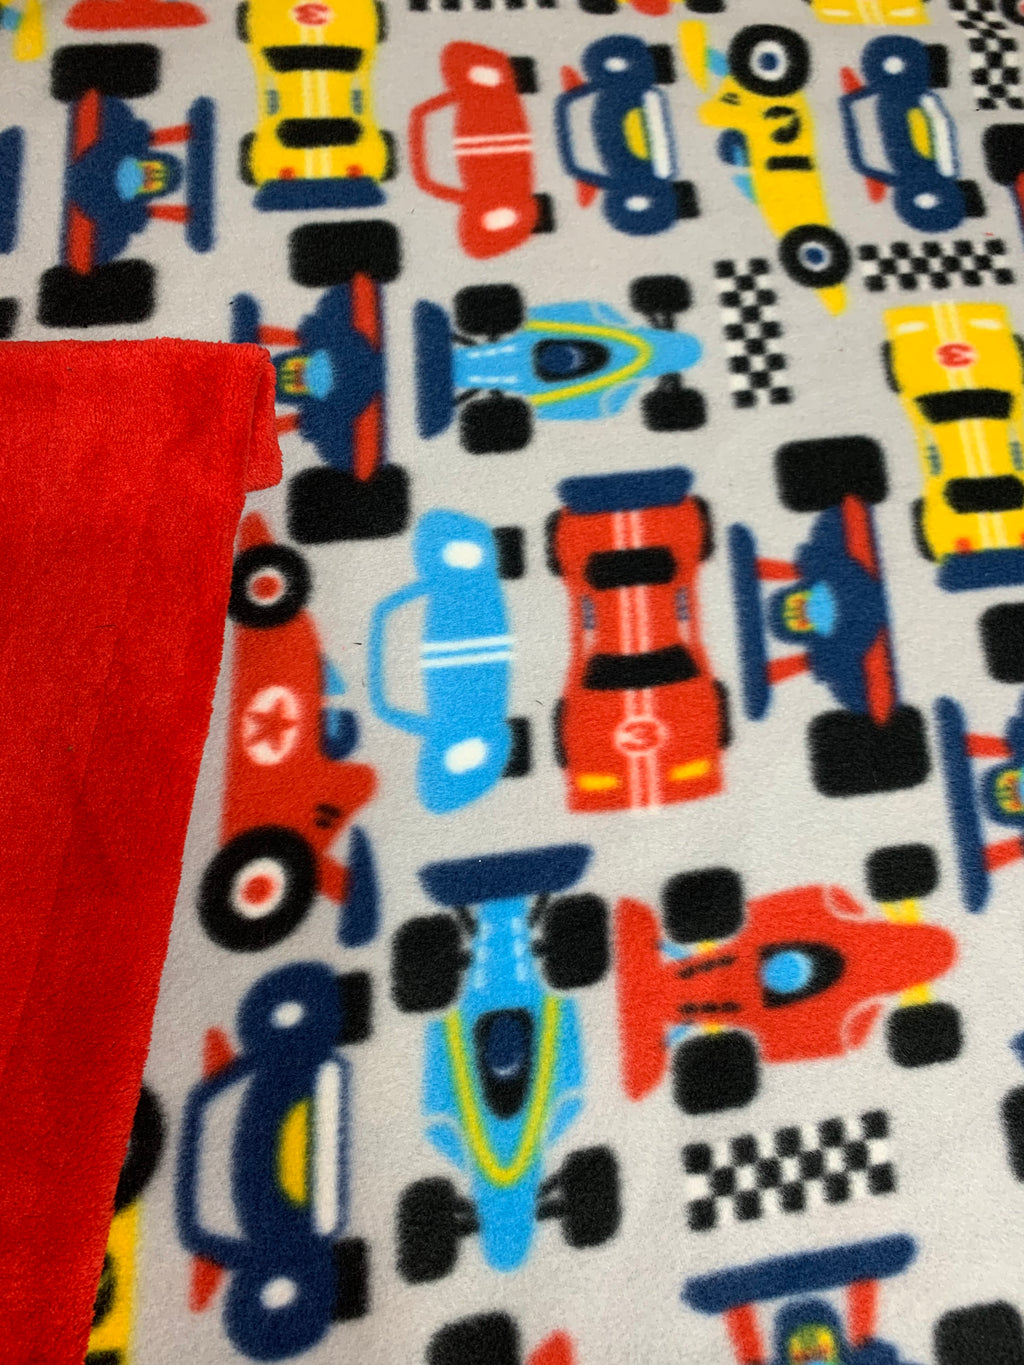 Indy Race Cars Fleece Blanket - Choose from 4 different backings